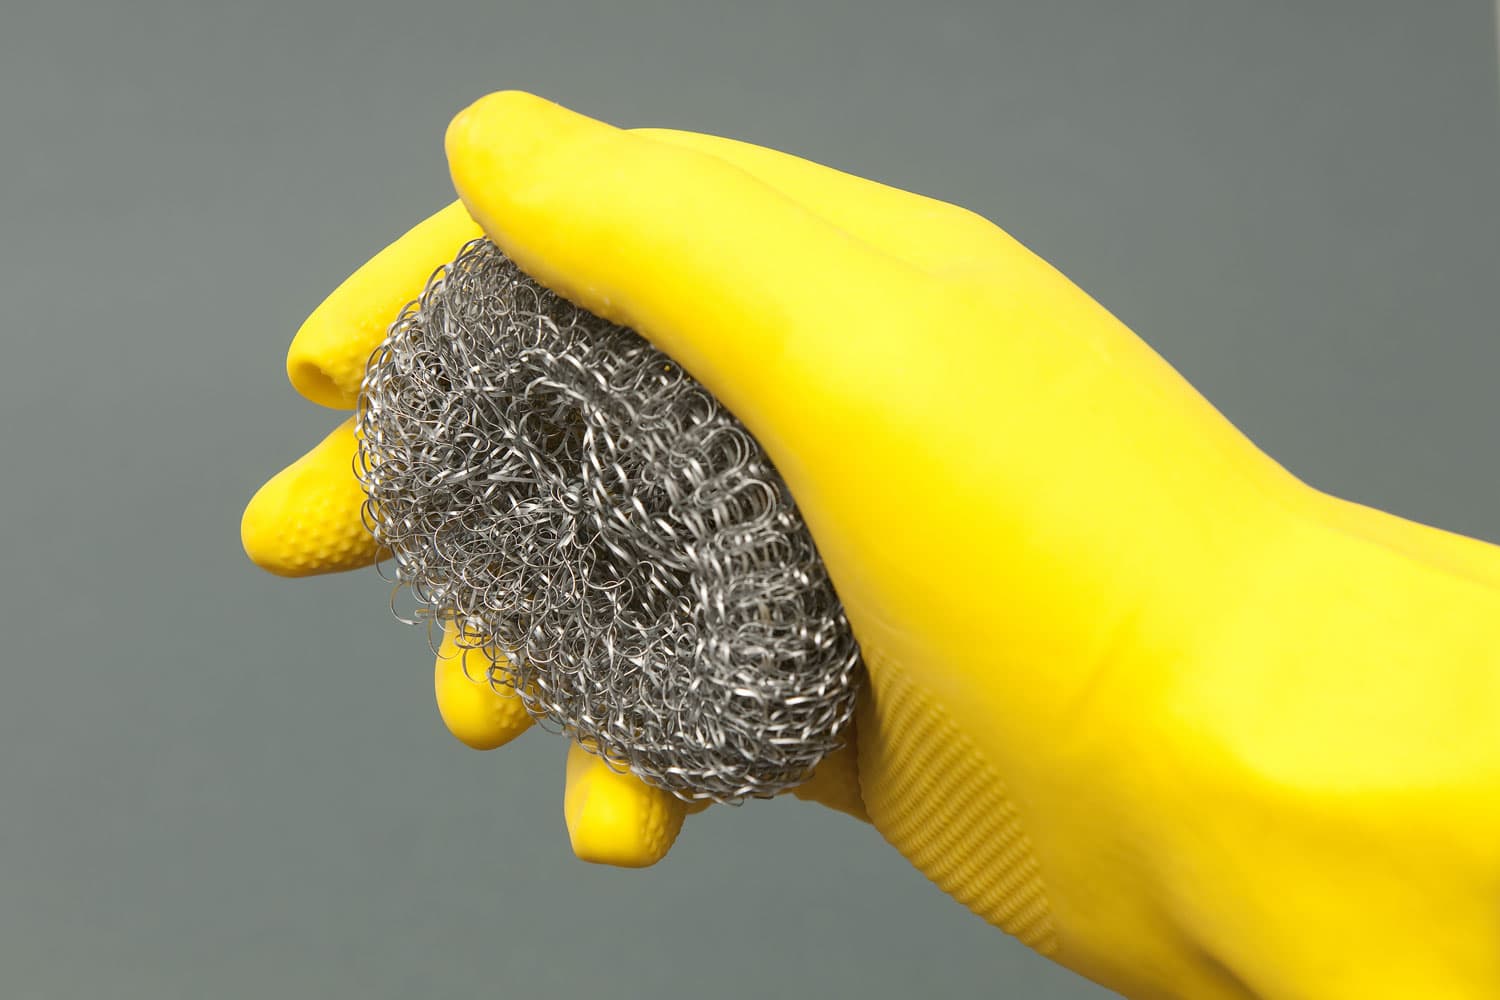 metal scouring pads - steel wool to clean the kitchen